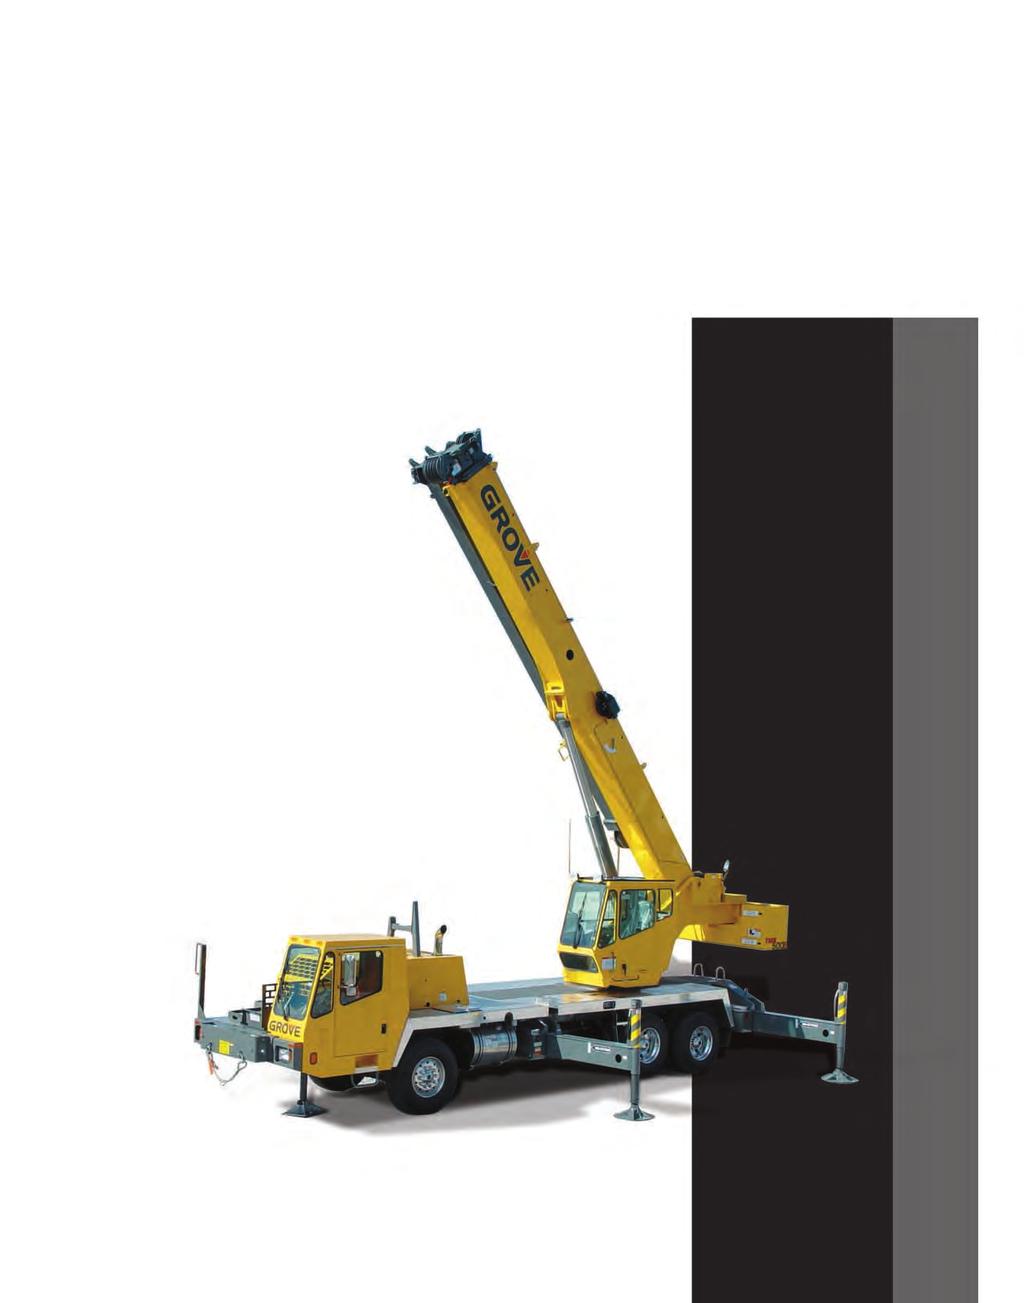 product guide features ton ( mt) Capacity 29 ft.-95 ft. (8.8-29 m) 4 section, full power synchronized boom 26 ft.- ft. (7.9-13.7 m) offsettable telescopic swingaway extension Optional 8,4 lb.